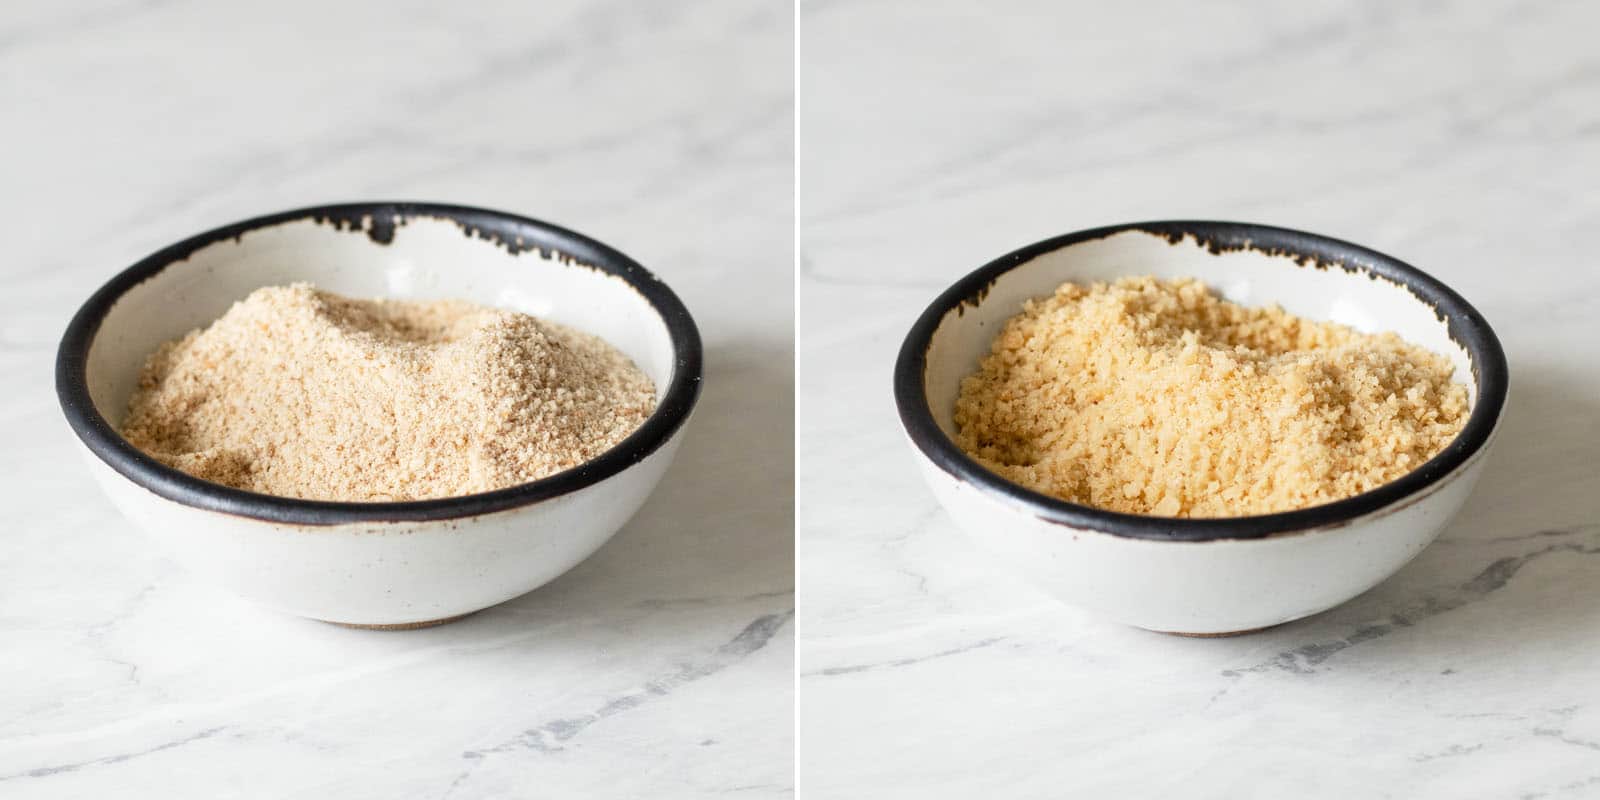 Conventional breadcrumbs and panko 